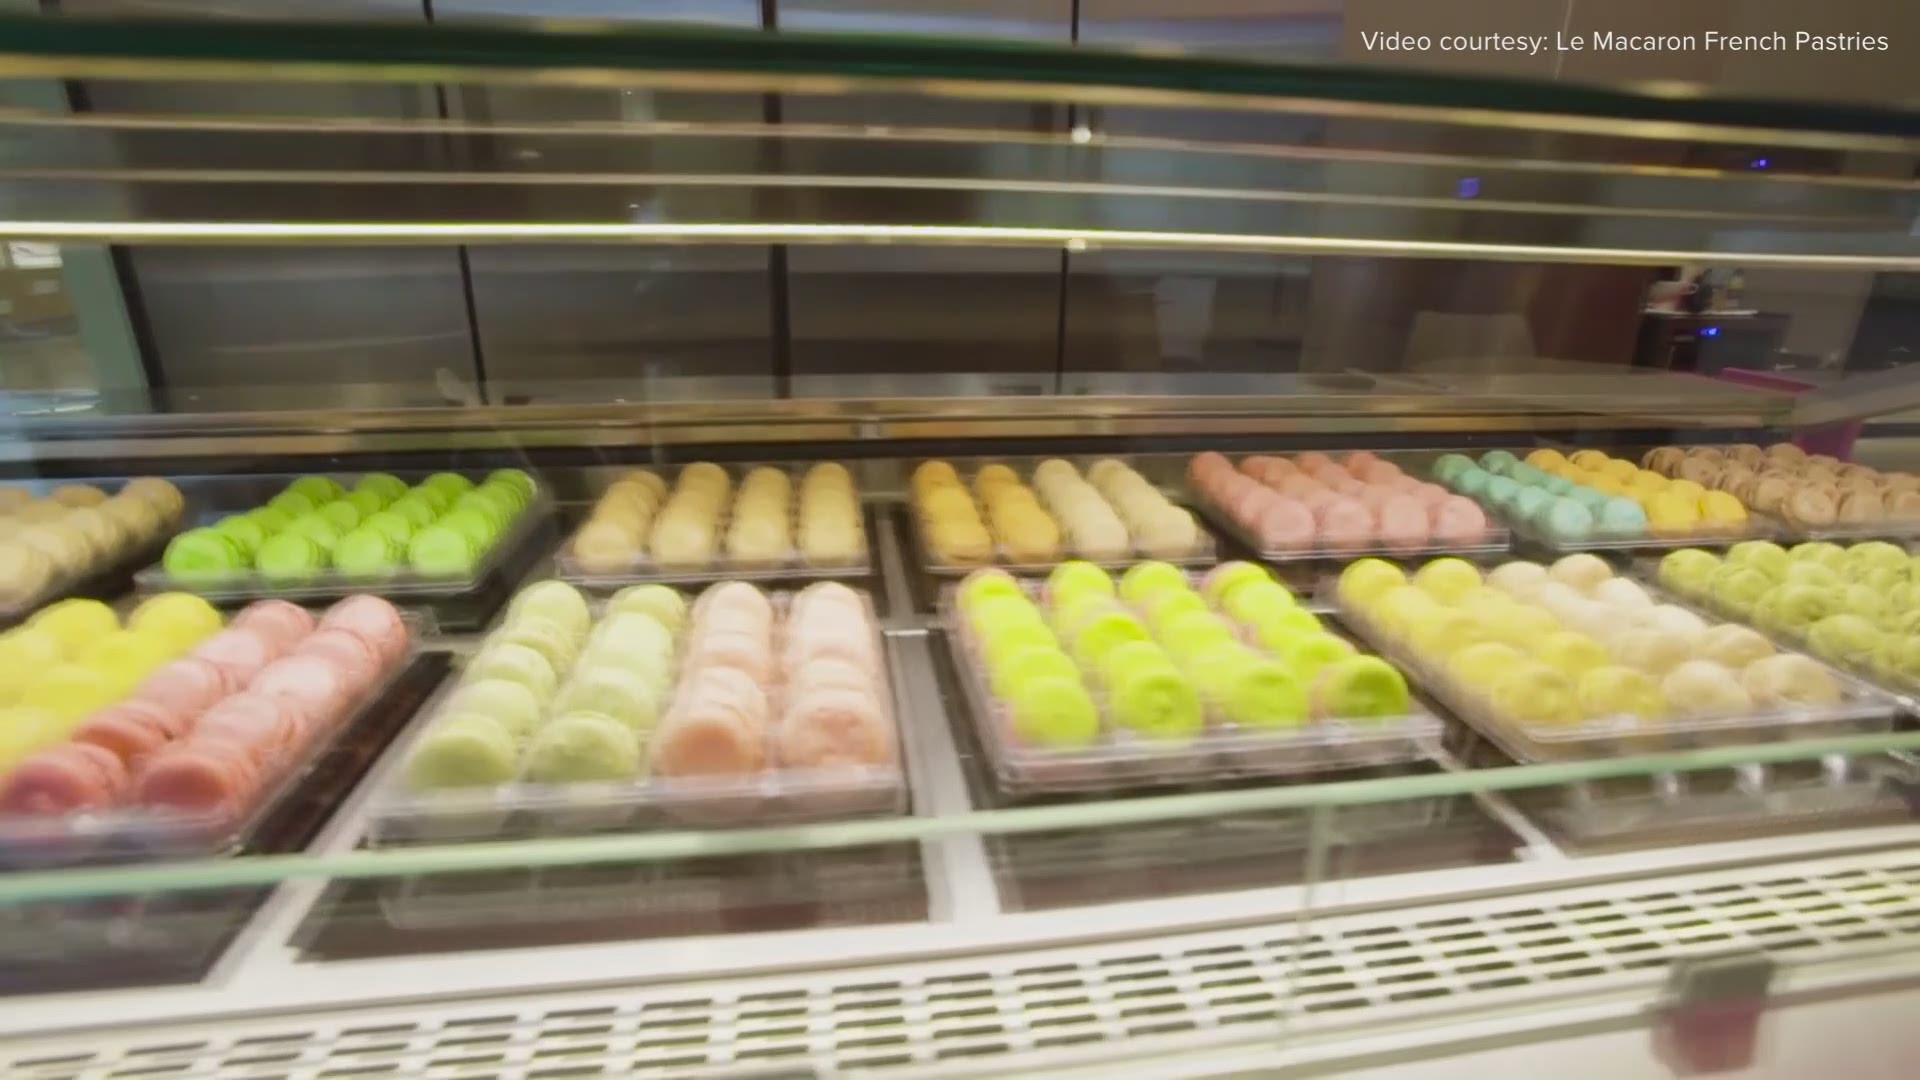 Le Macaron plans to open in Webster Groves this fall, bringing an authentic and inviting French atmosphere. Video provided by Le Macaron French Pastries.